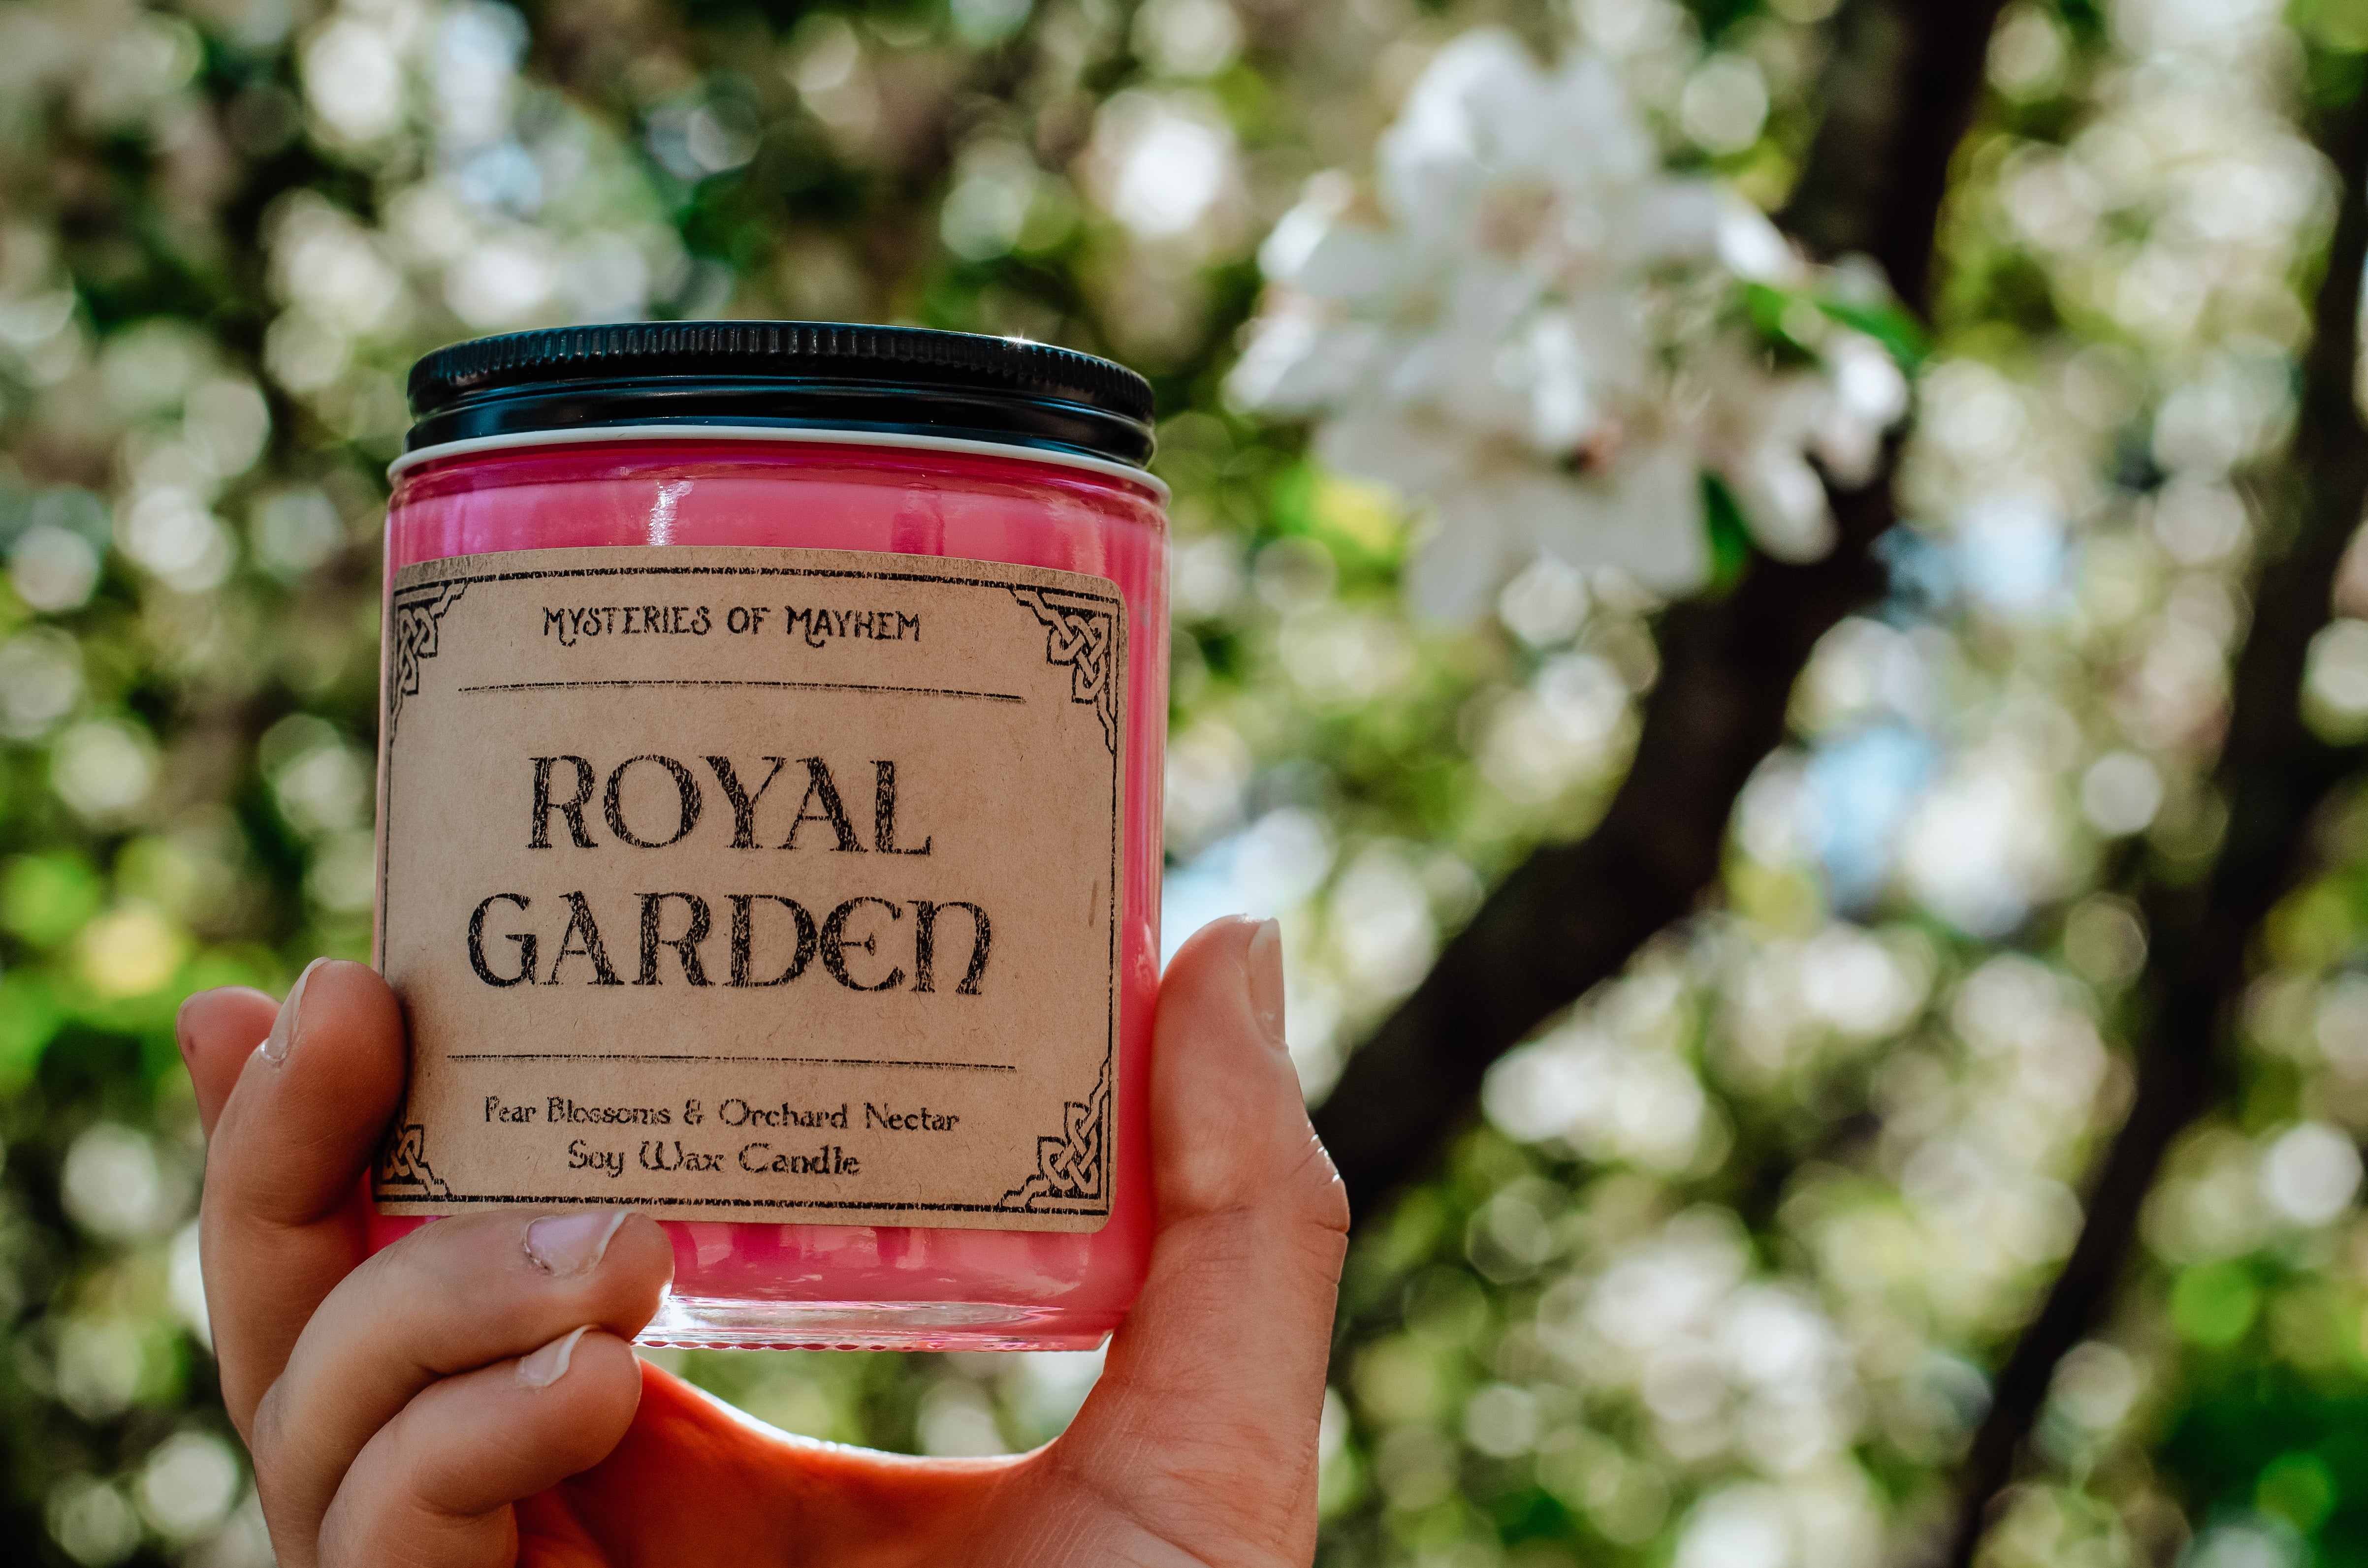 Royal Garden - Pear Blossoms and Orchard Nectar Scented